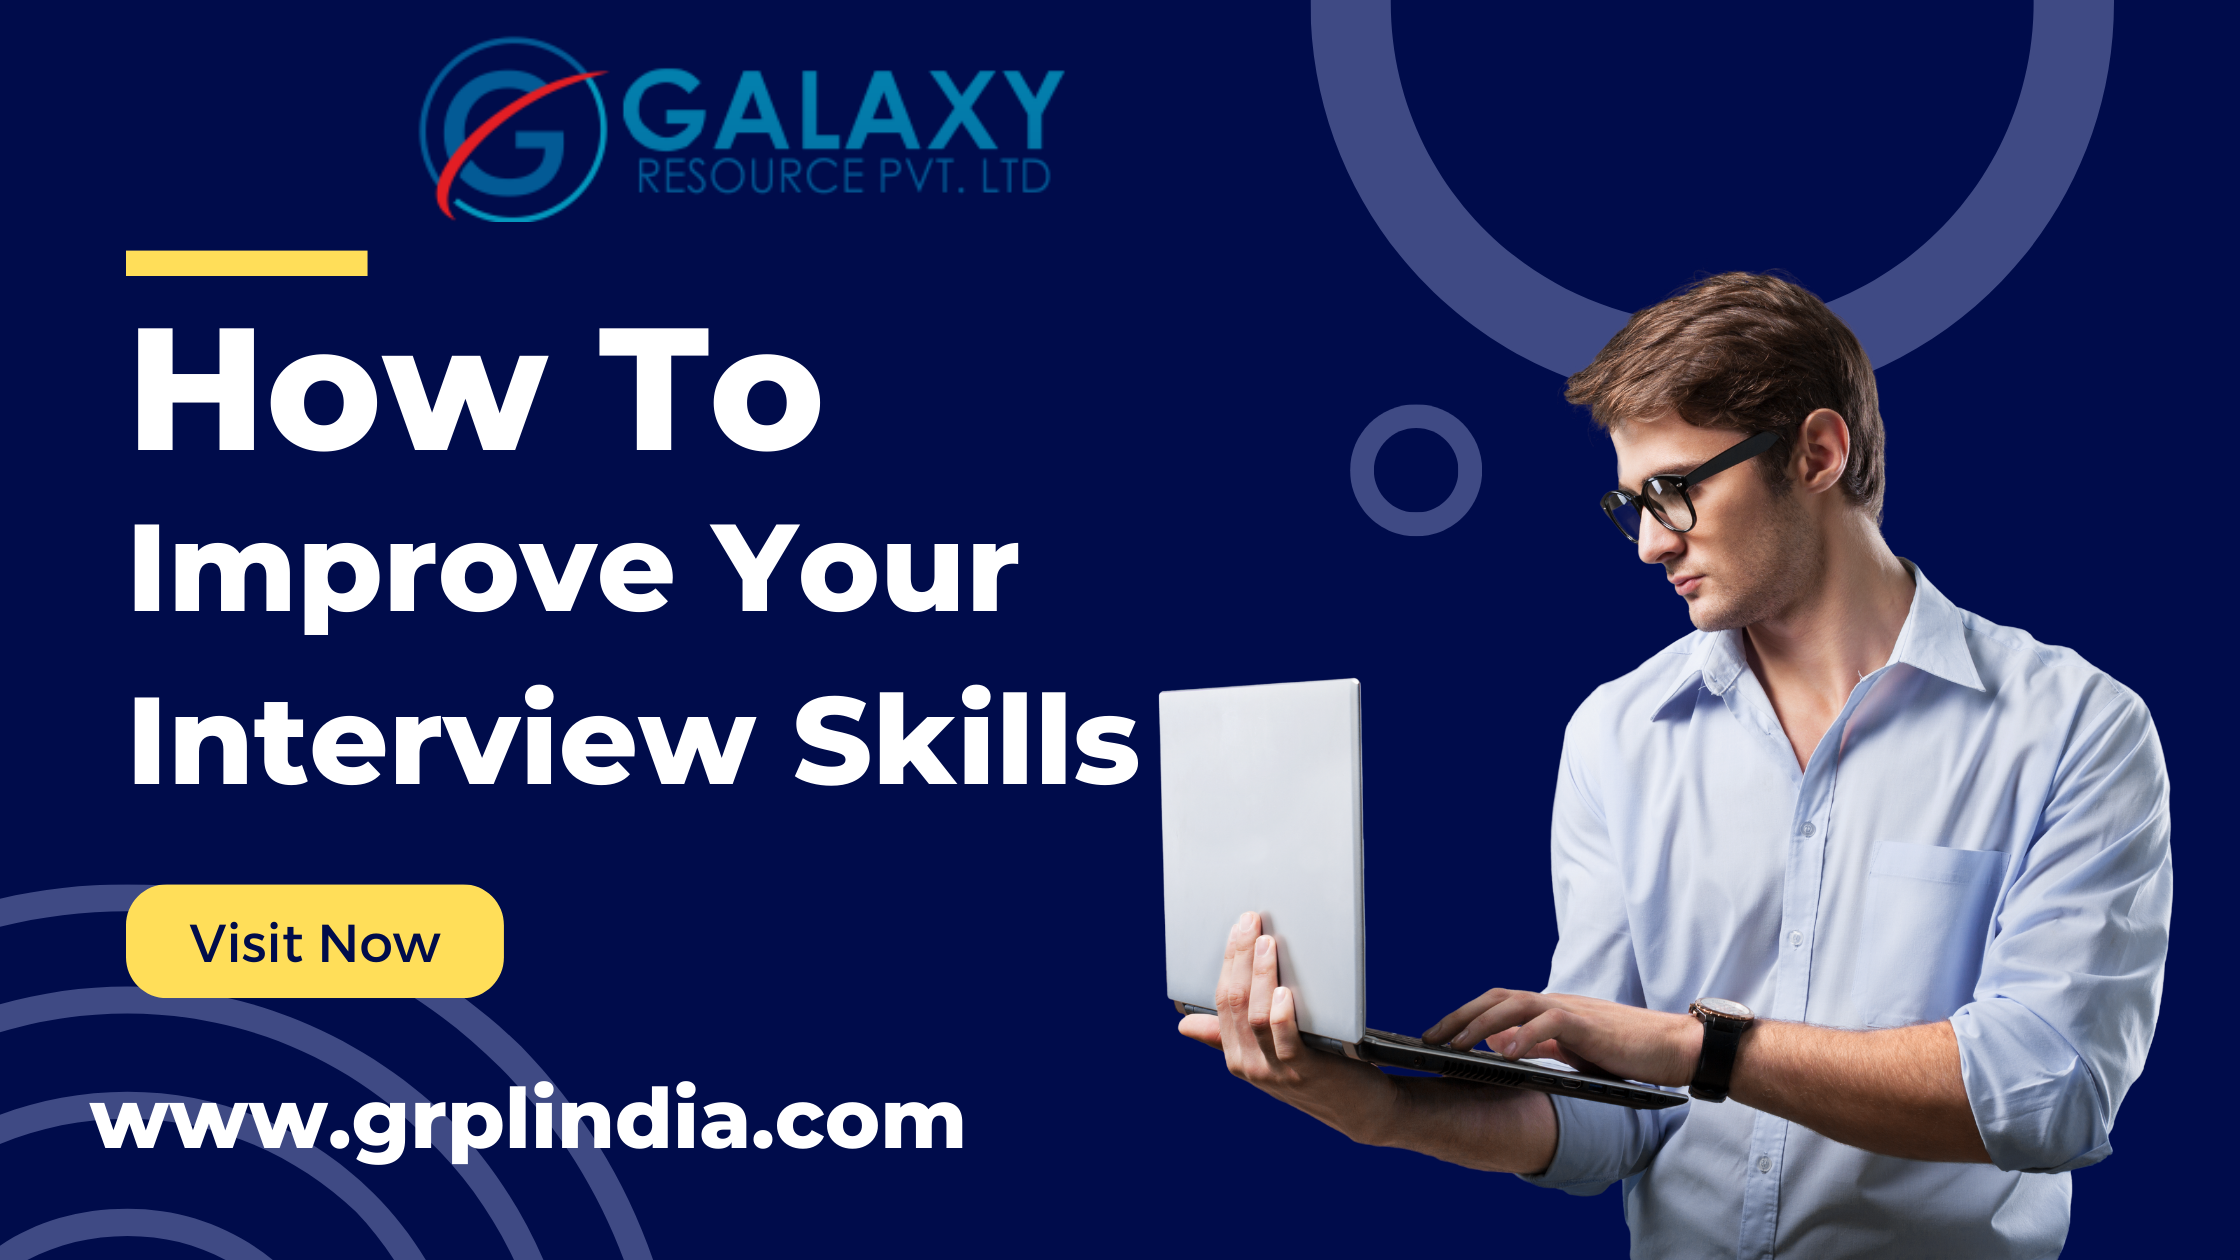 How to Improve Your Interview Skills